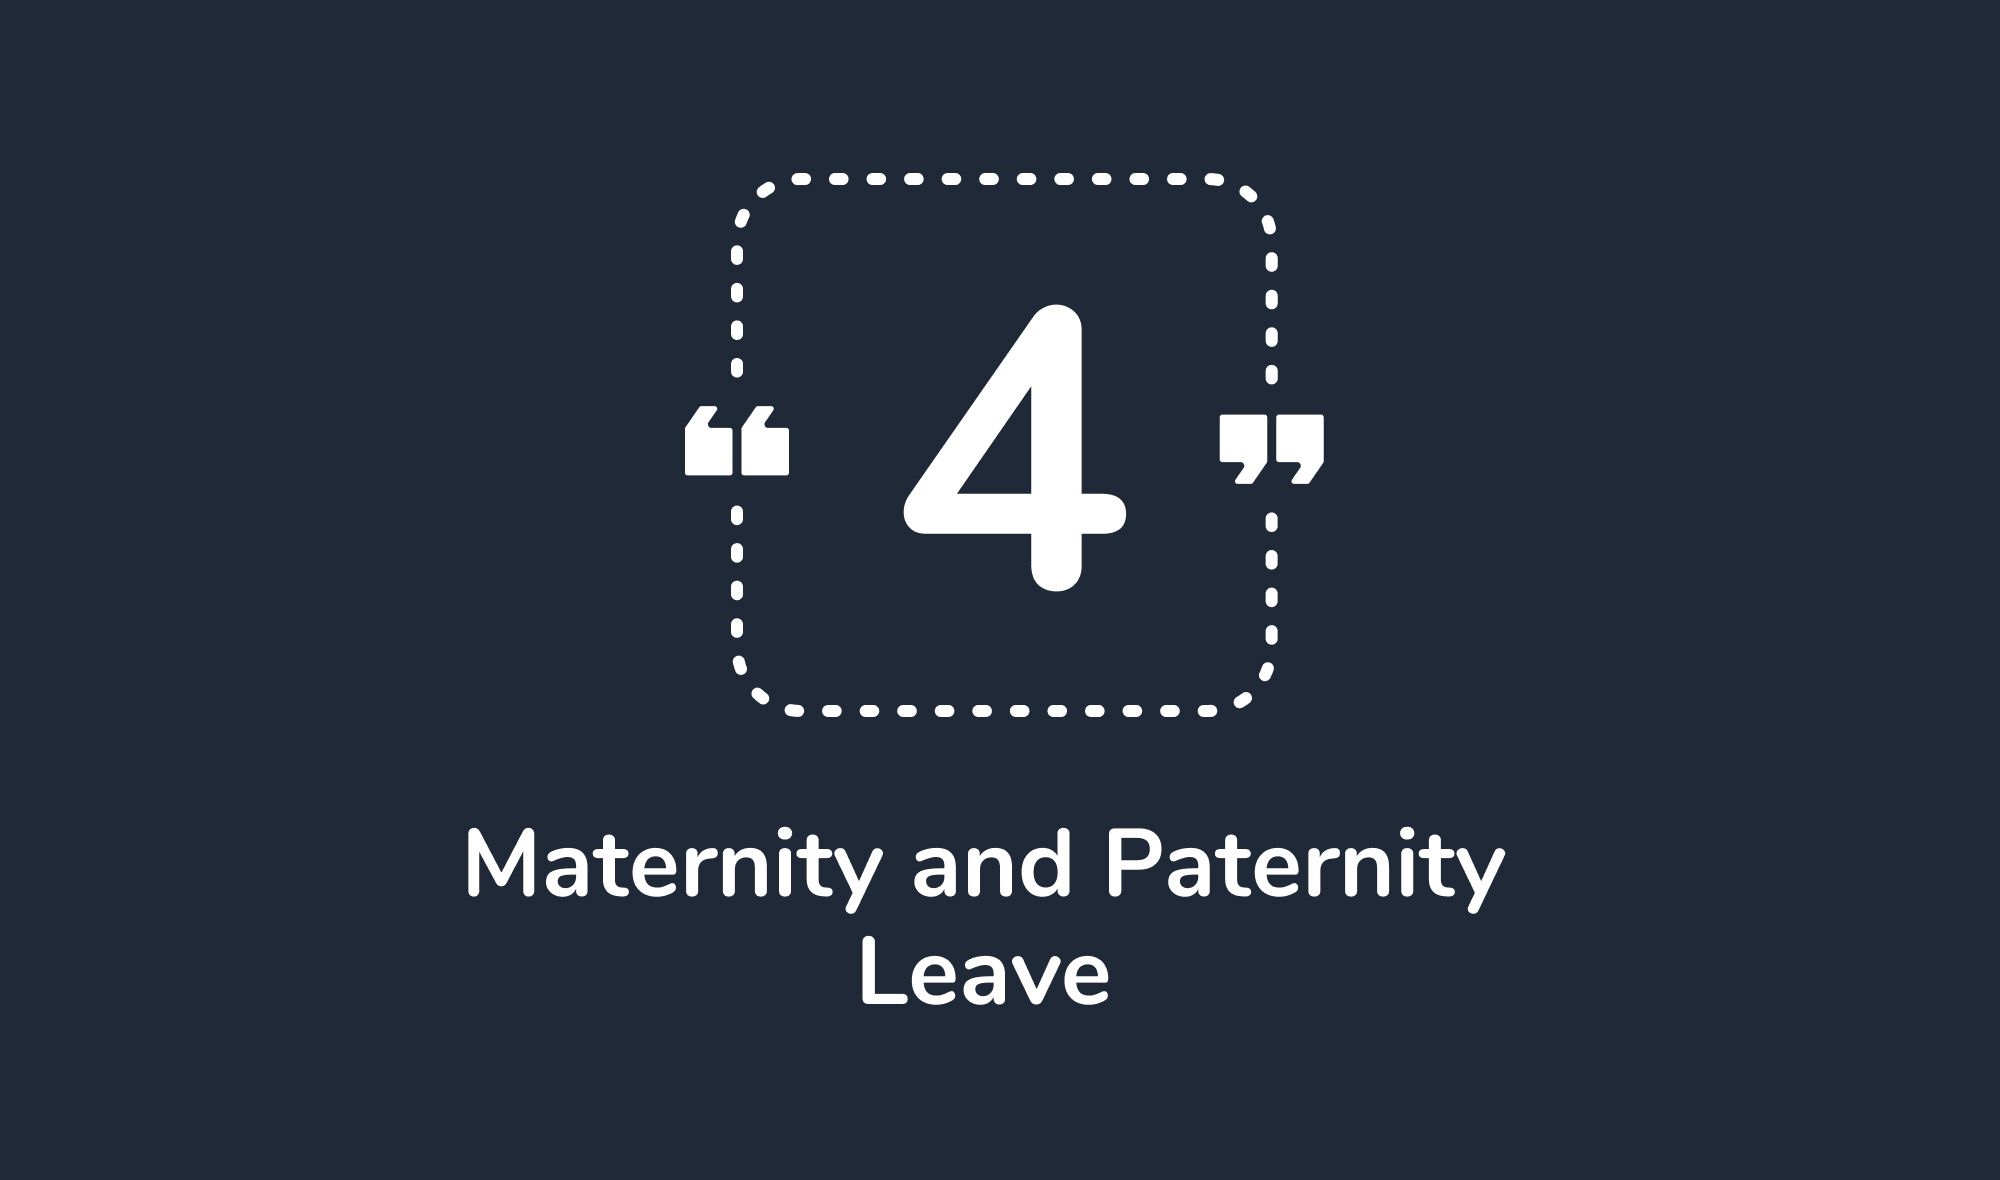 Maternity and Paternity Leave